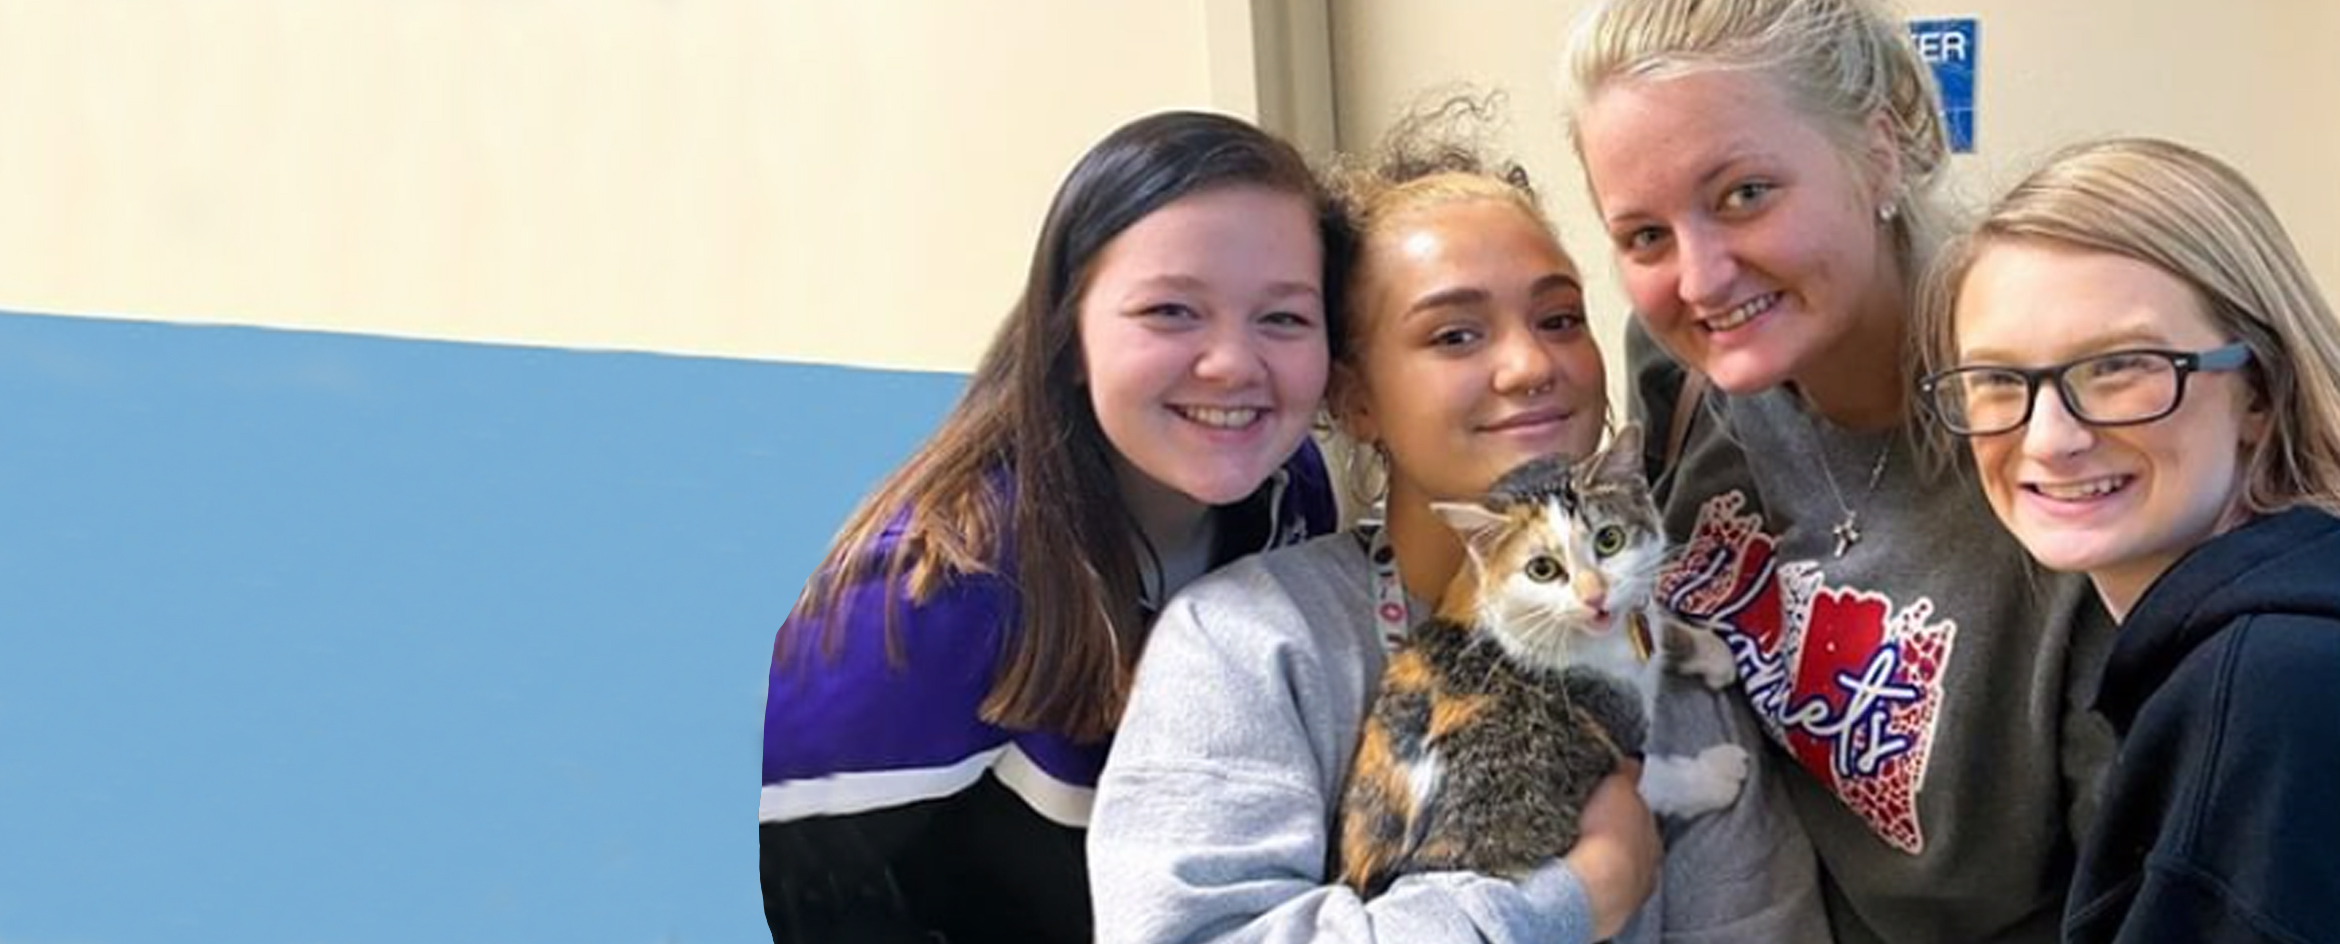 Volunteer Opportunities for Youth - Humane Society of Missouri